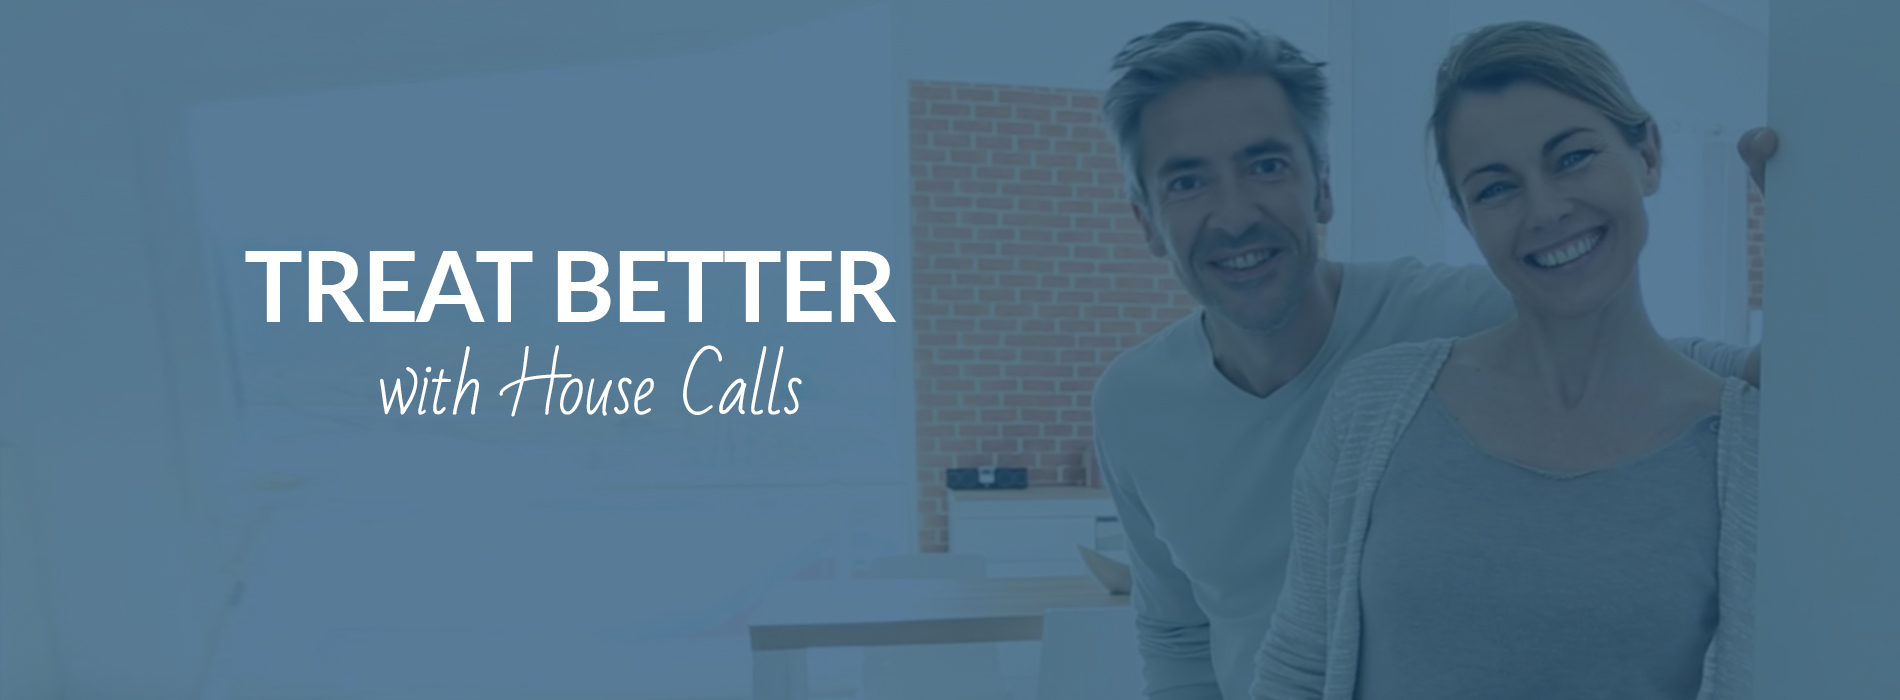 Start a House Call Practice to Improve Patient Care